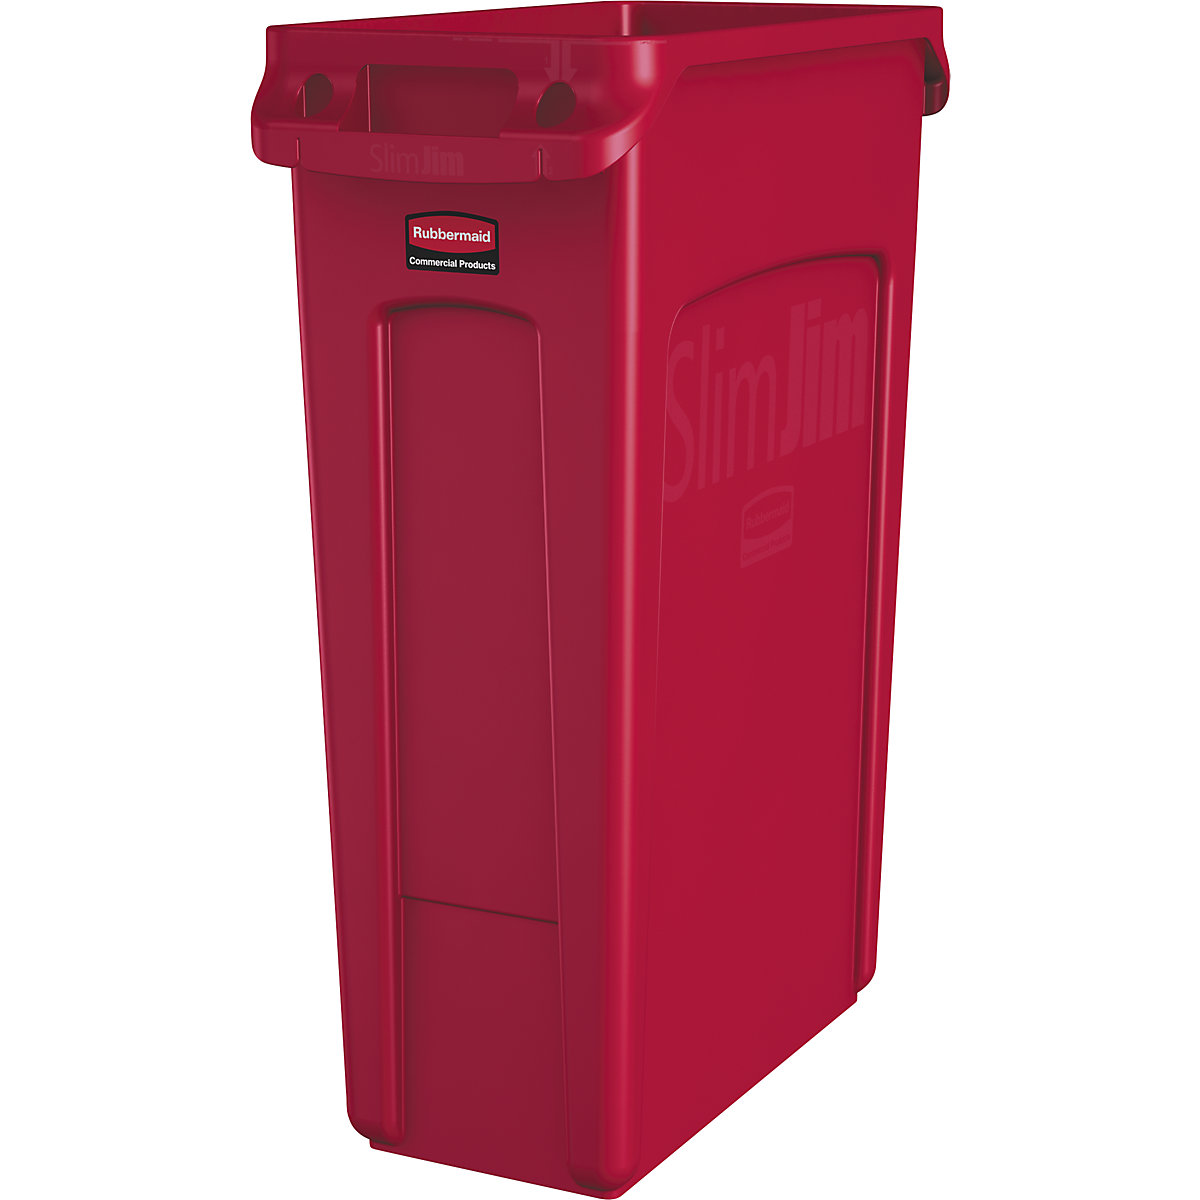 SLIM JIM® recyclable waste collector/waste bin – Rubbermaid, capacity 87 l, with ventilation ducts, red, 3+ items-10